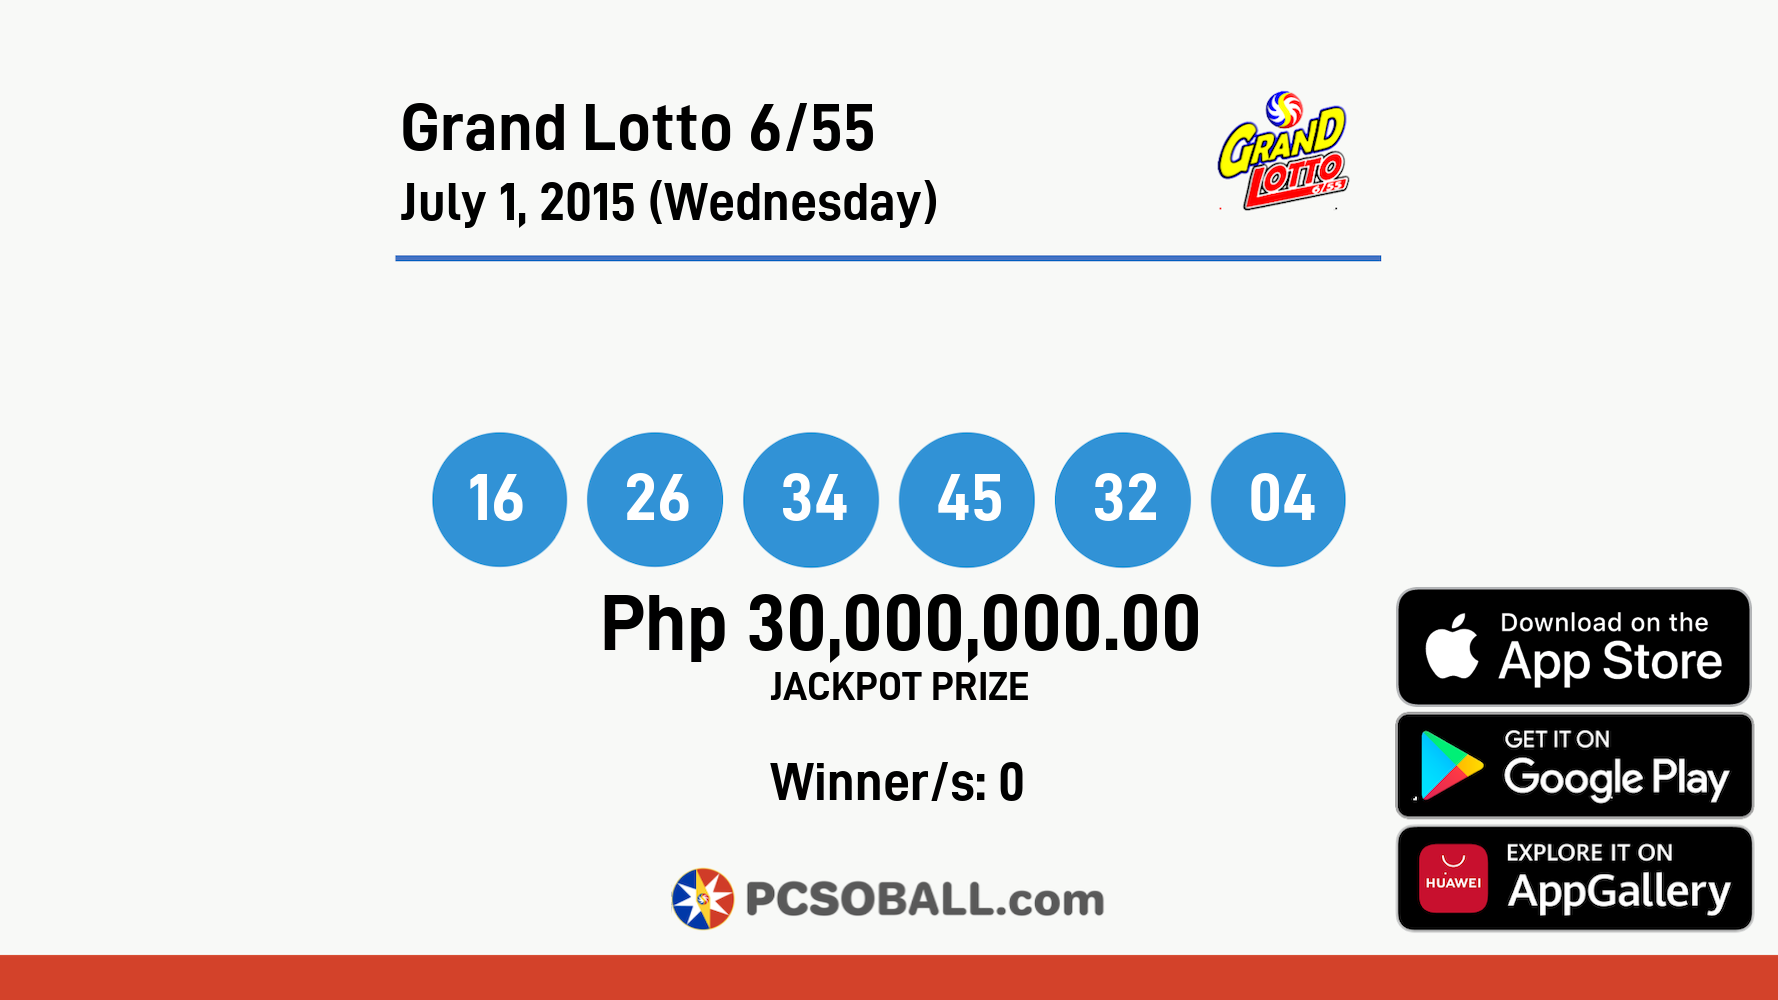 Grand Lotto 6/55 July 1, 2015 (Wednesday) Result